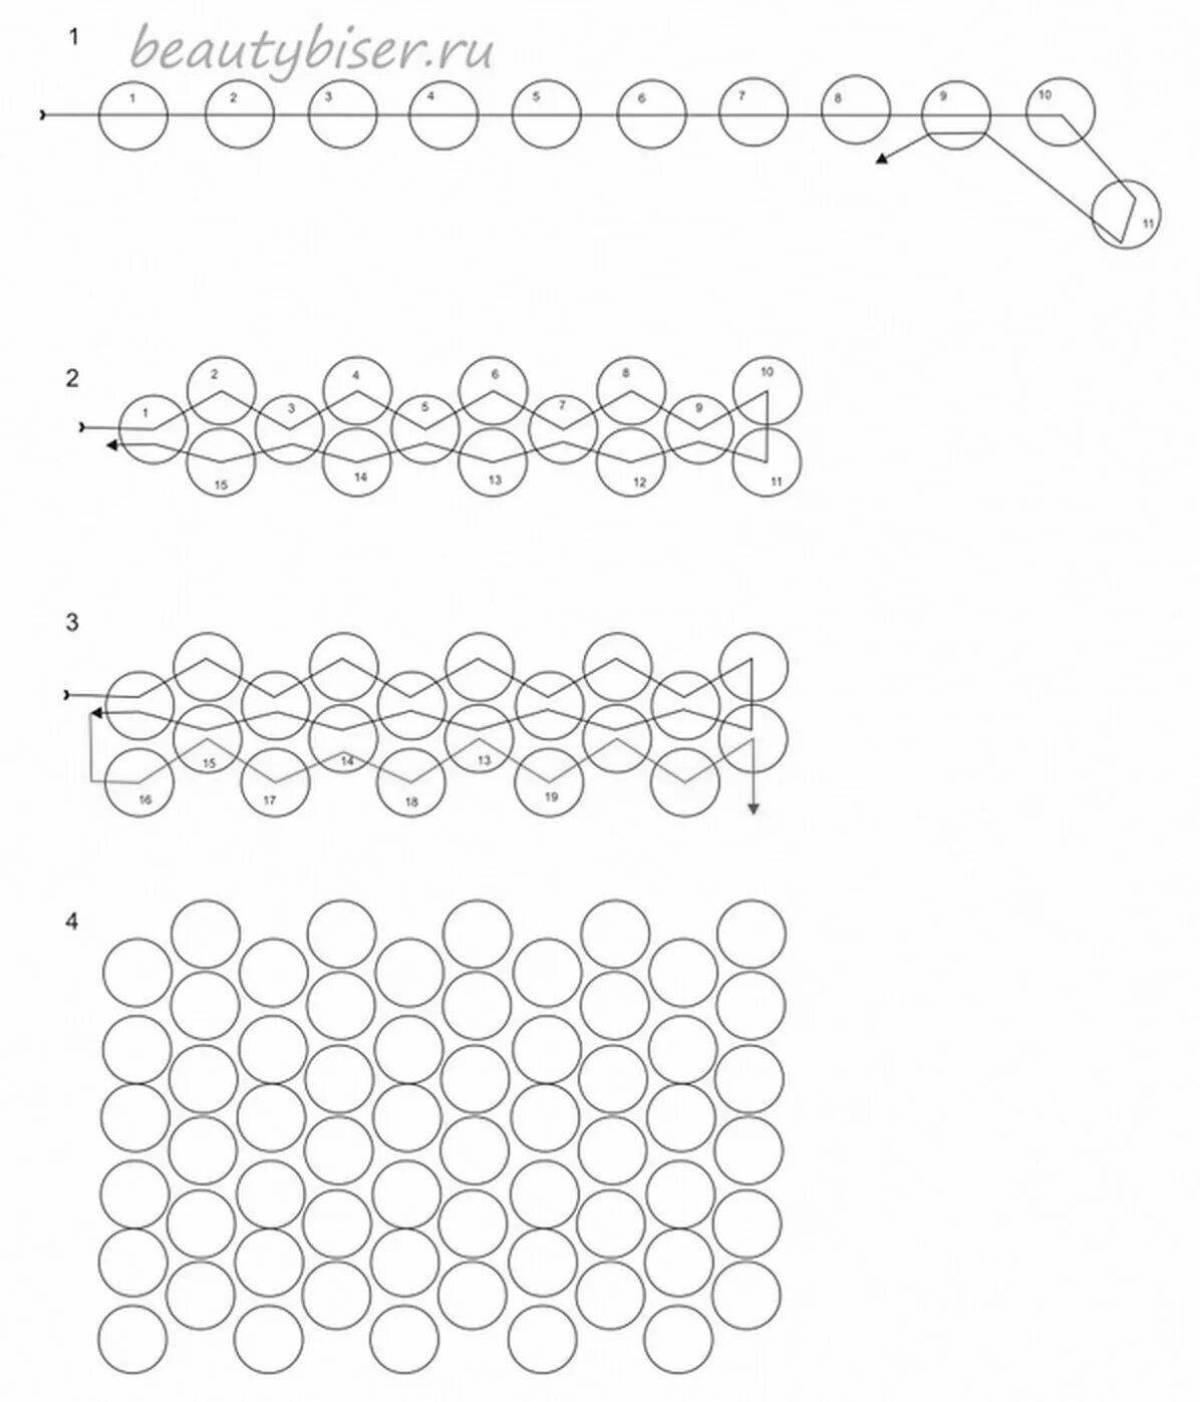 Colouring beads with a dazzling pattern